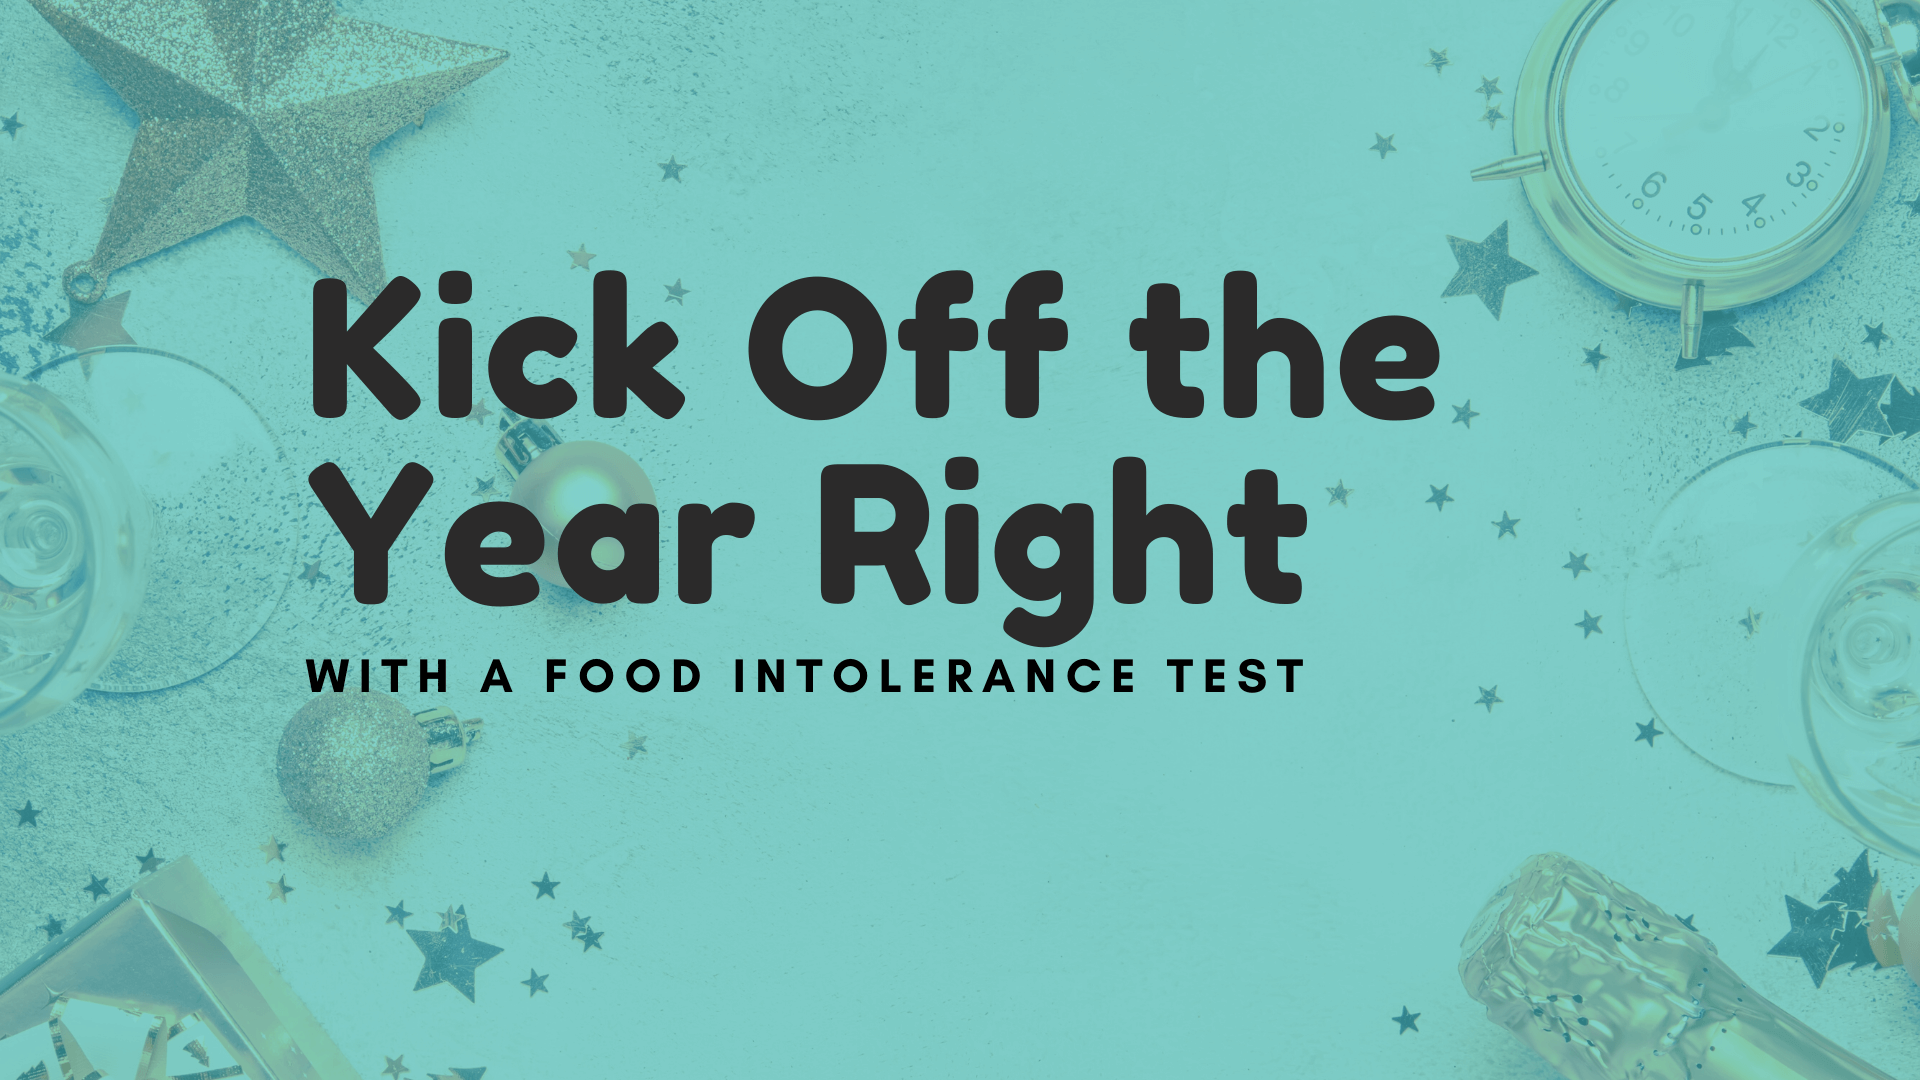 Kick Off the Year Right with a Food Intolerance Test